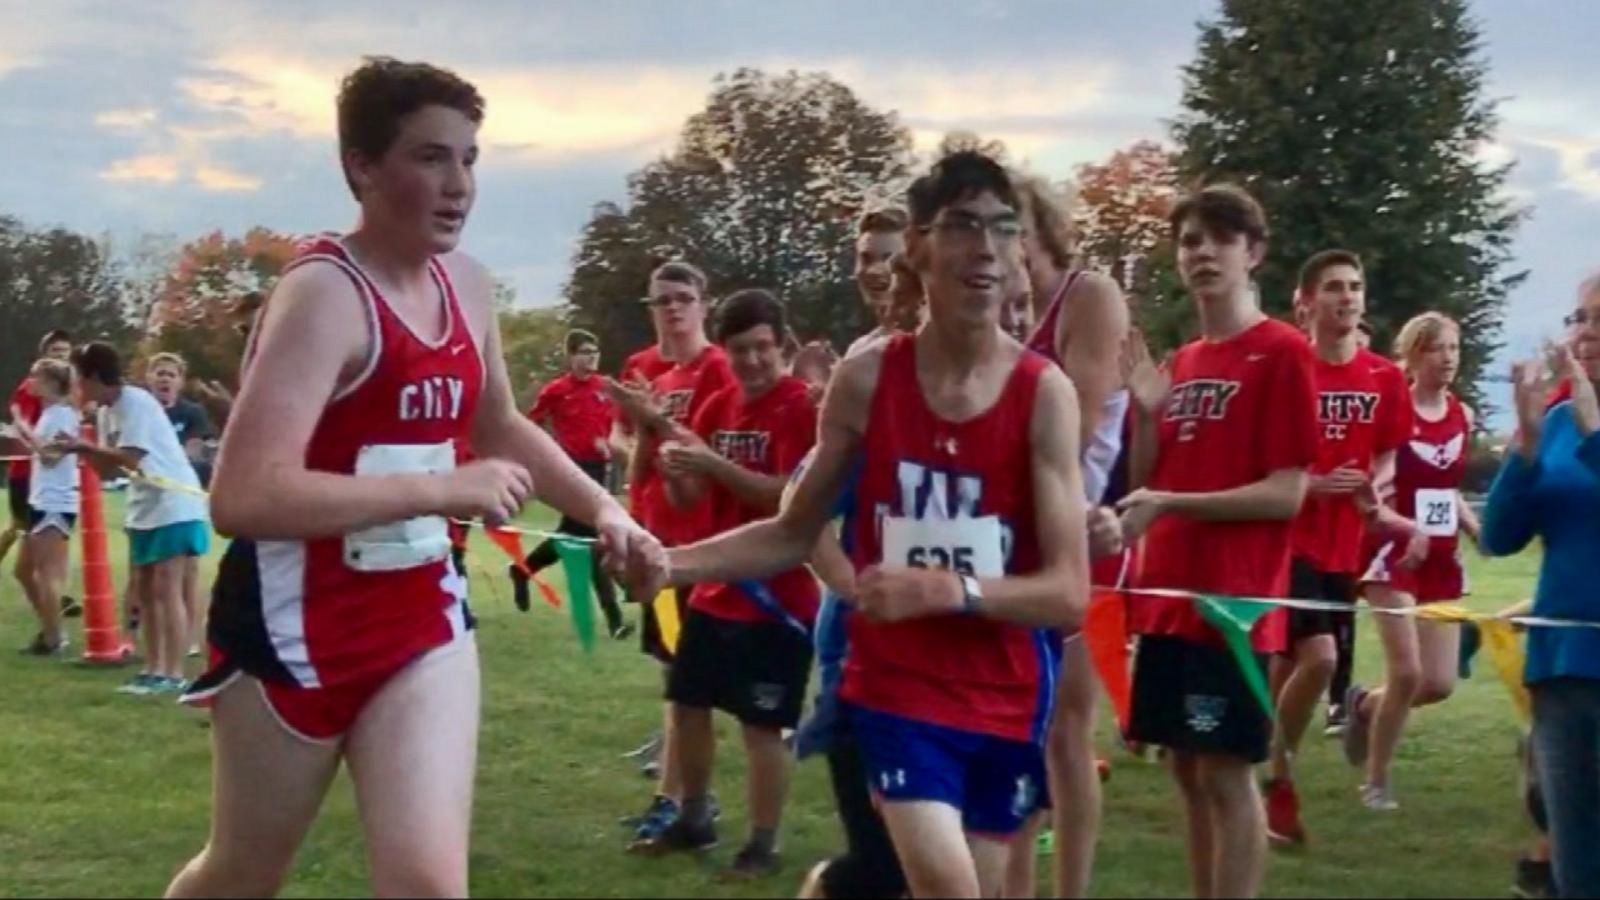 Our 'Persons of the Week' Highlights Runner at High School Cross-Country Meet